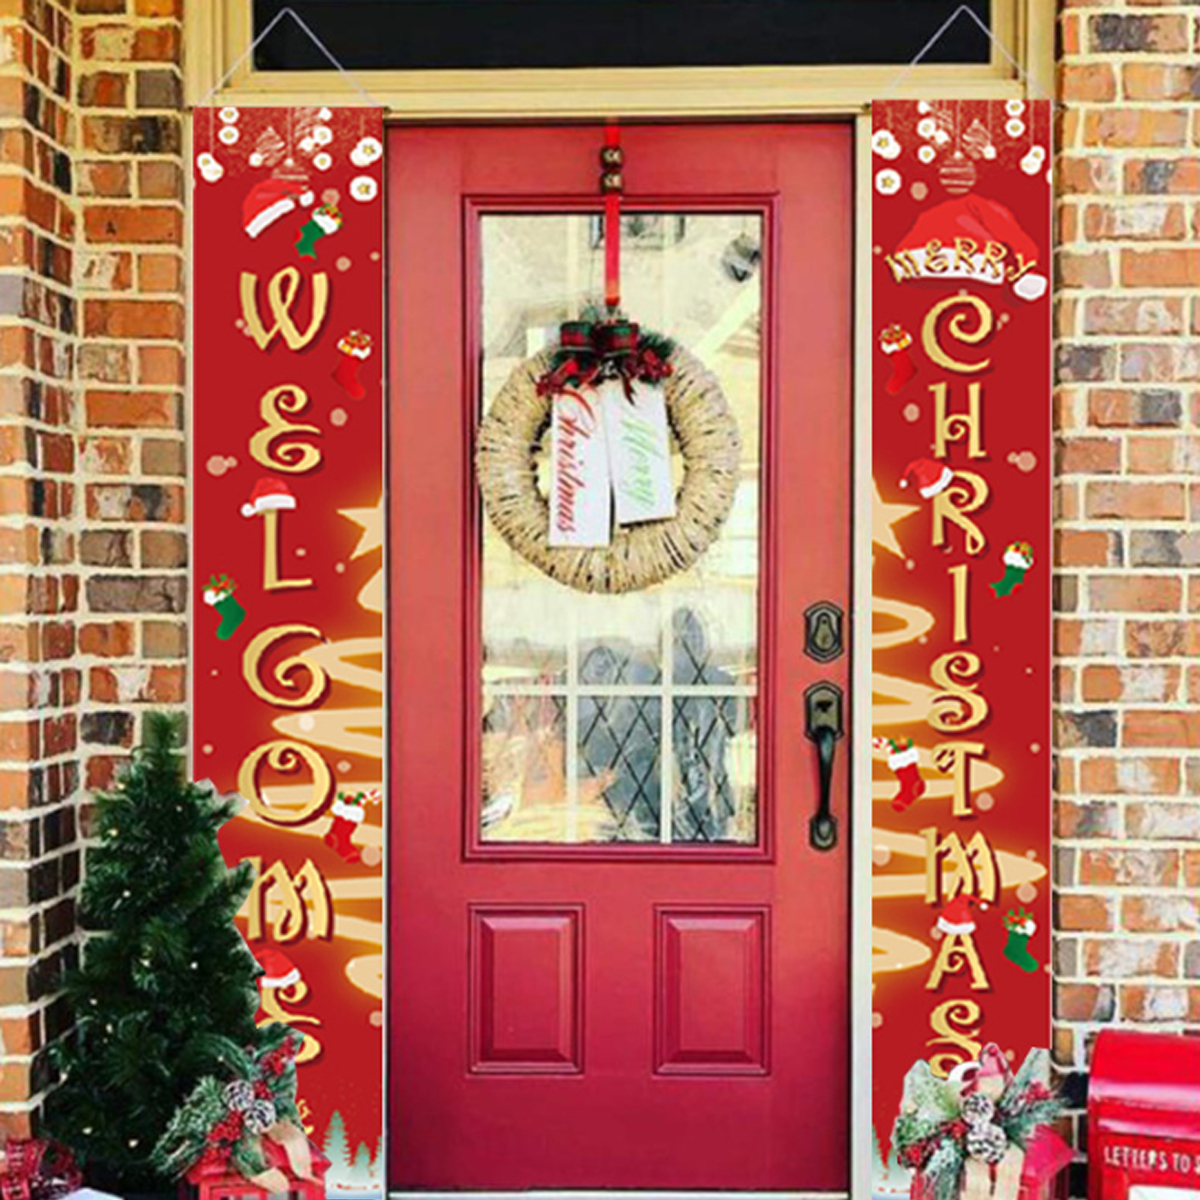 Merry-Christmas-Porch-Banner-Xmas-Outdoor-Decoration-Couplet-Hanging-Cloth-Door-Hanging-Ornaments-fo-1785753-4